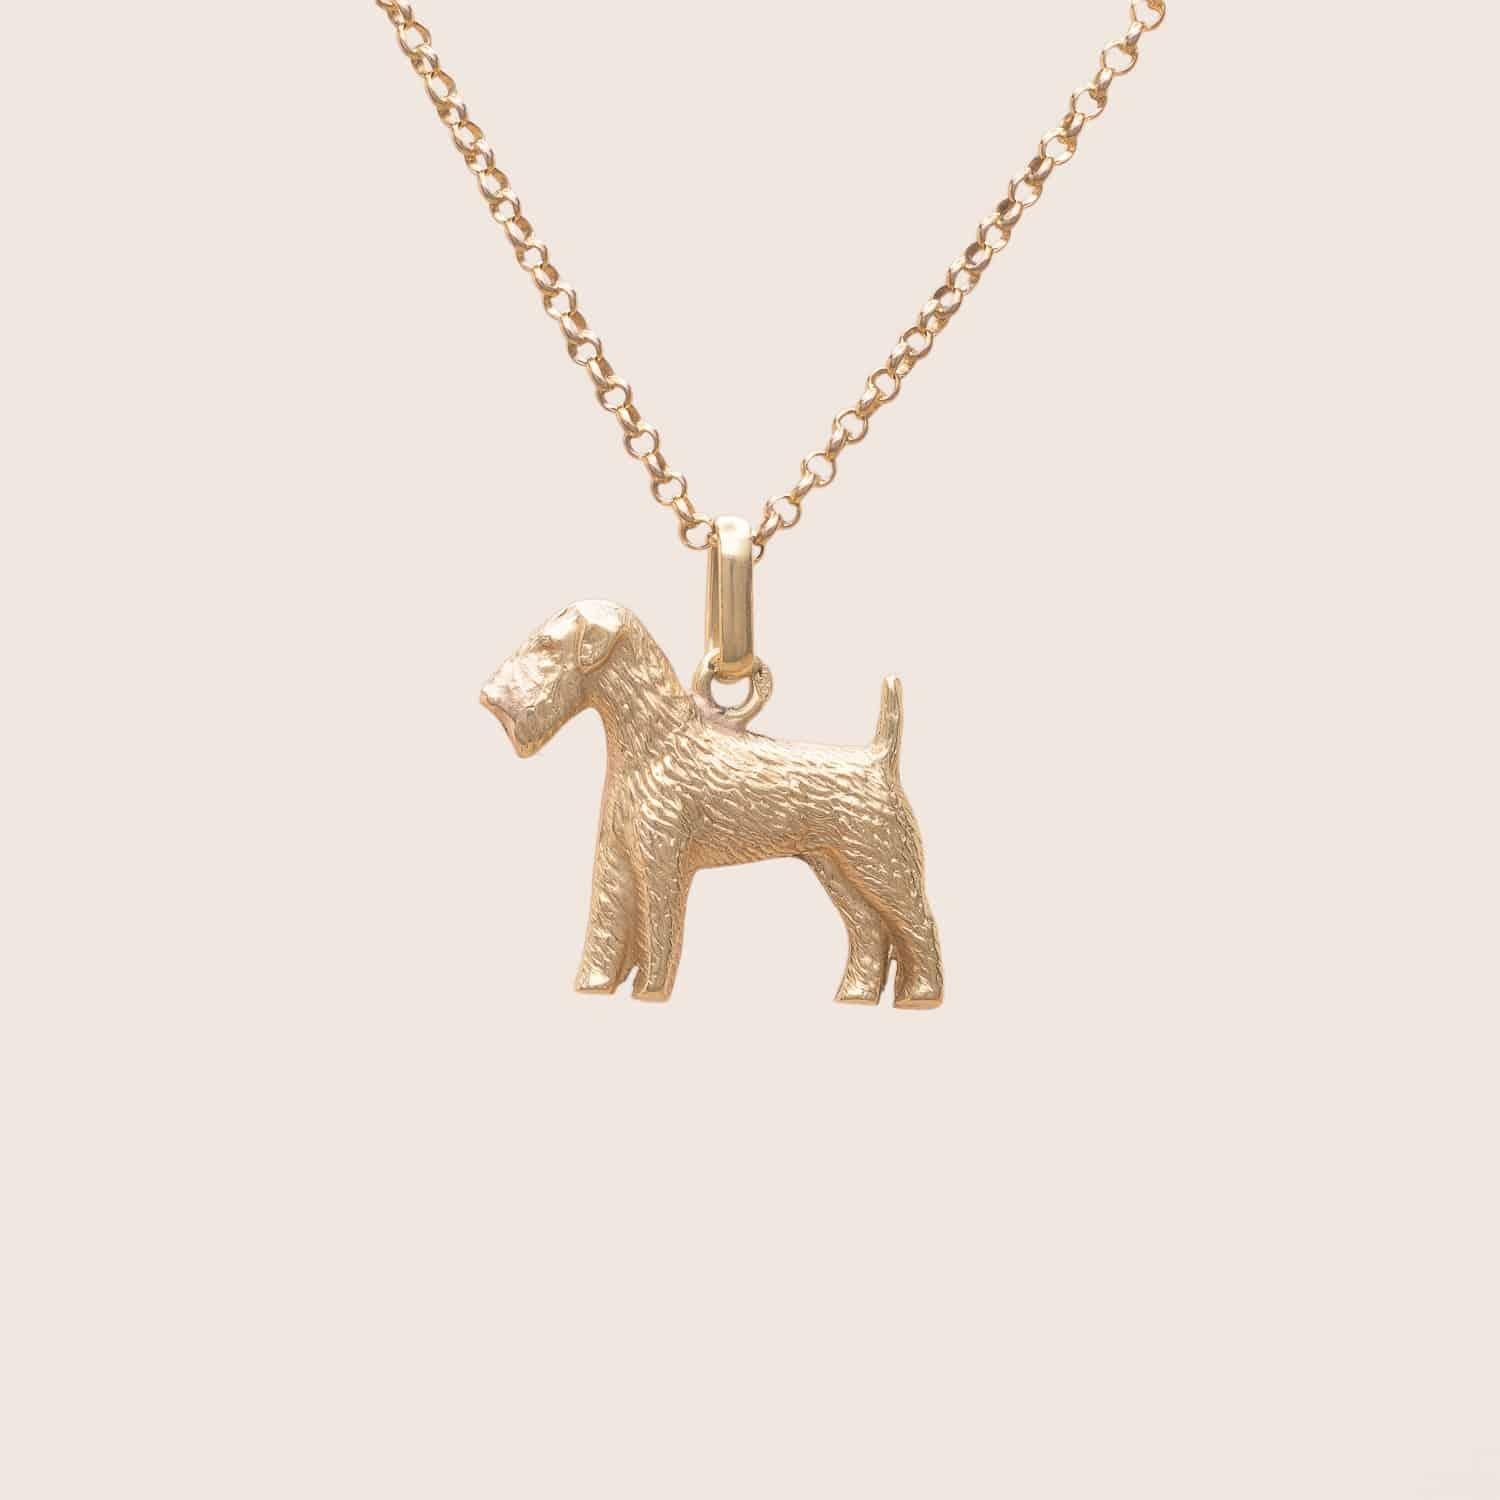 Unique vintage dog-shaped 18K chiseled gold pendant. 

Resembles a schnauzer this cute little pendant is a perfect conversation started ! 

Vintage from the nineties 

Eagle's head hallmark 

Dimensions : 20 x 19 mm

Gross weight : 1.90 g

Chain not